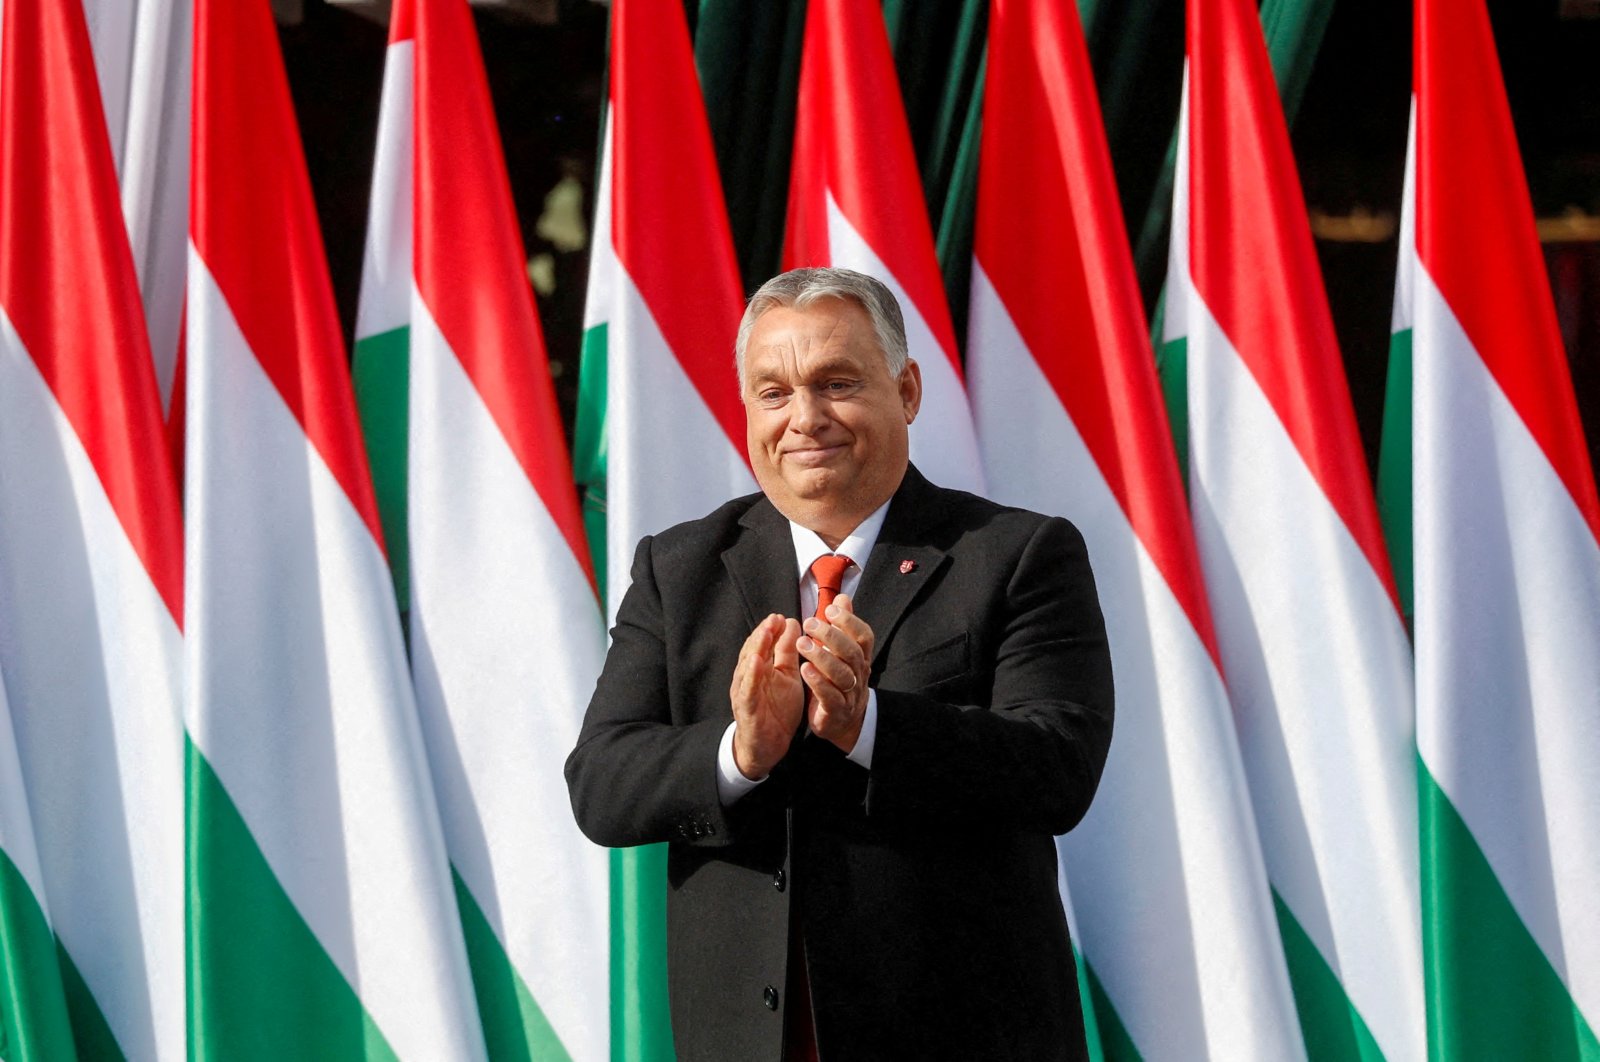 Hungarian Prime Minister Viktor Orban attends the inauguration of Mindszentyneum during the celebrations of the 66th anniversary of the Hungarian Uprising of 1956, in Zalaegerszeg, Hungary, Oct. 23, 2022. (Reuters Photo)